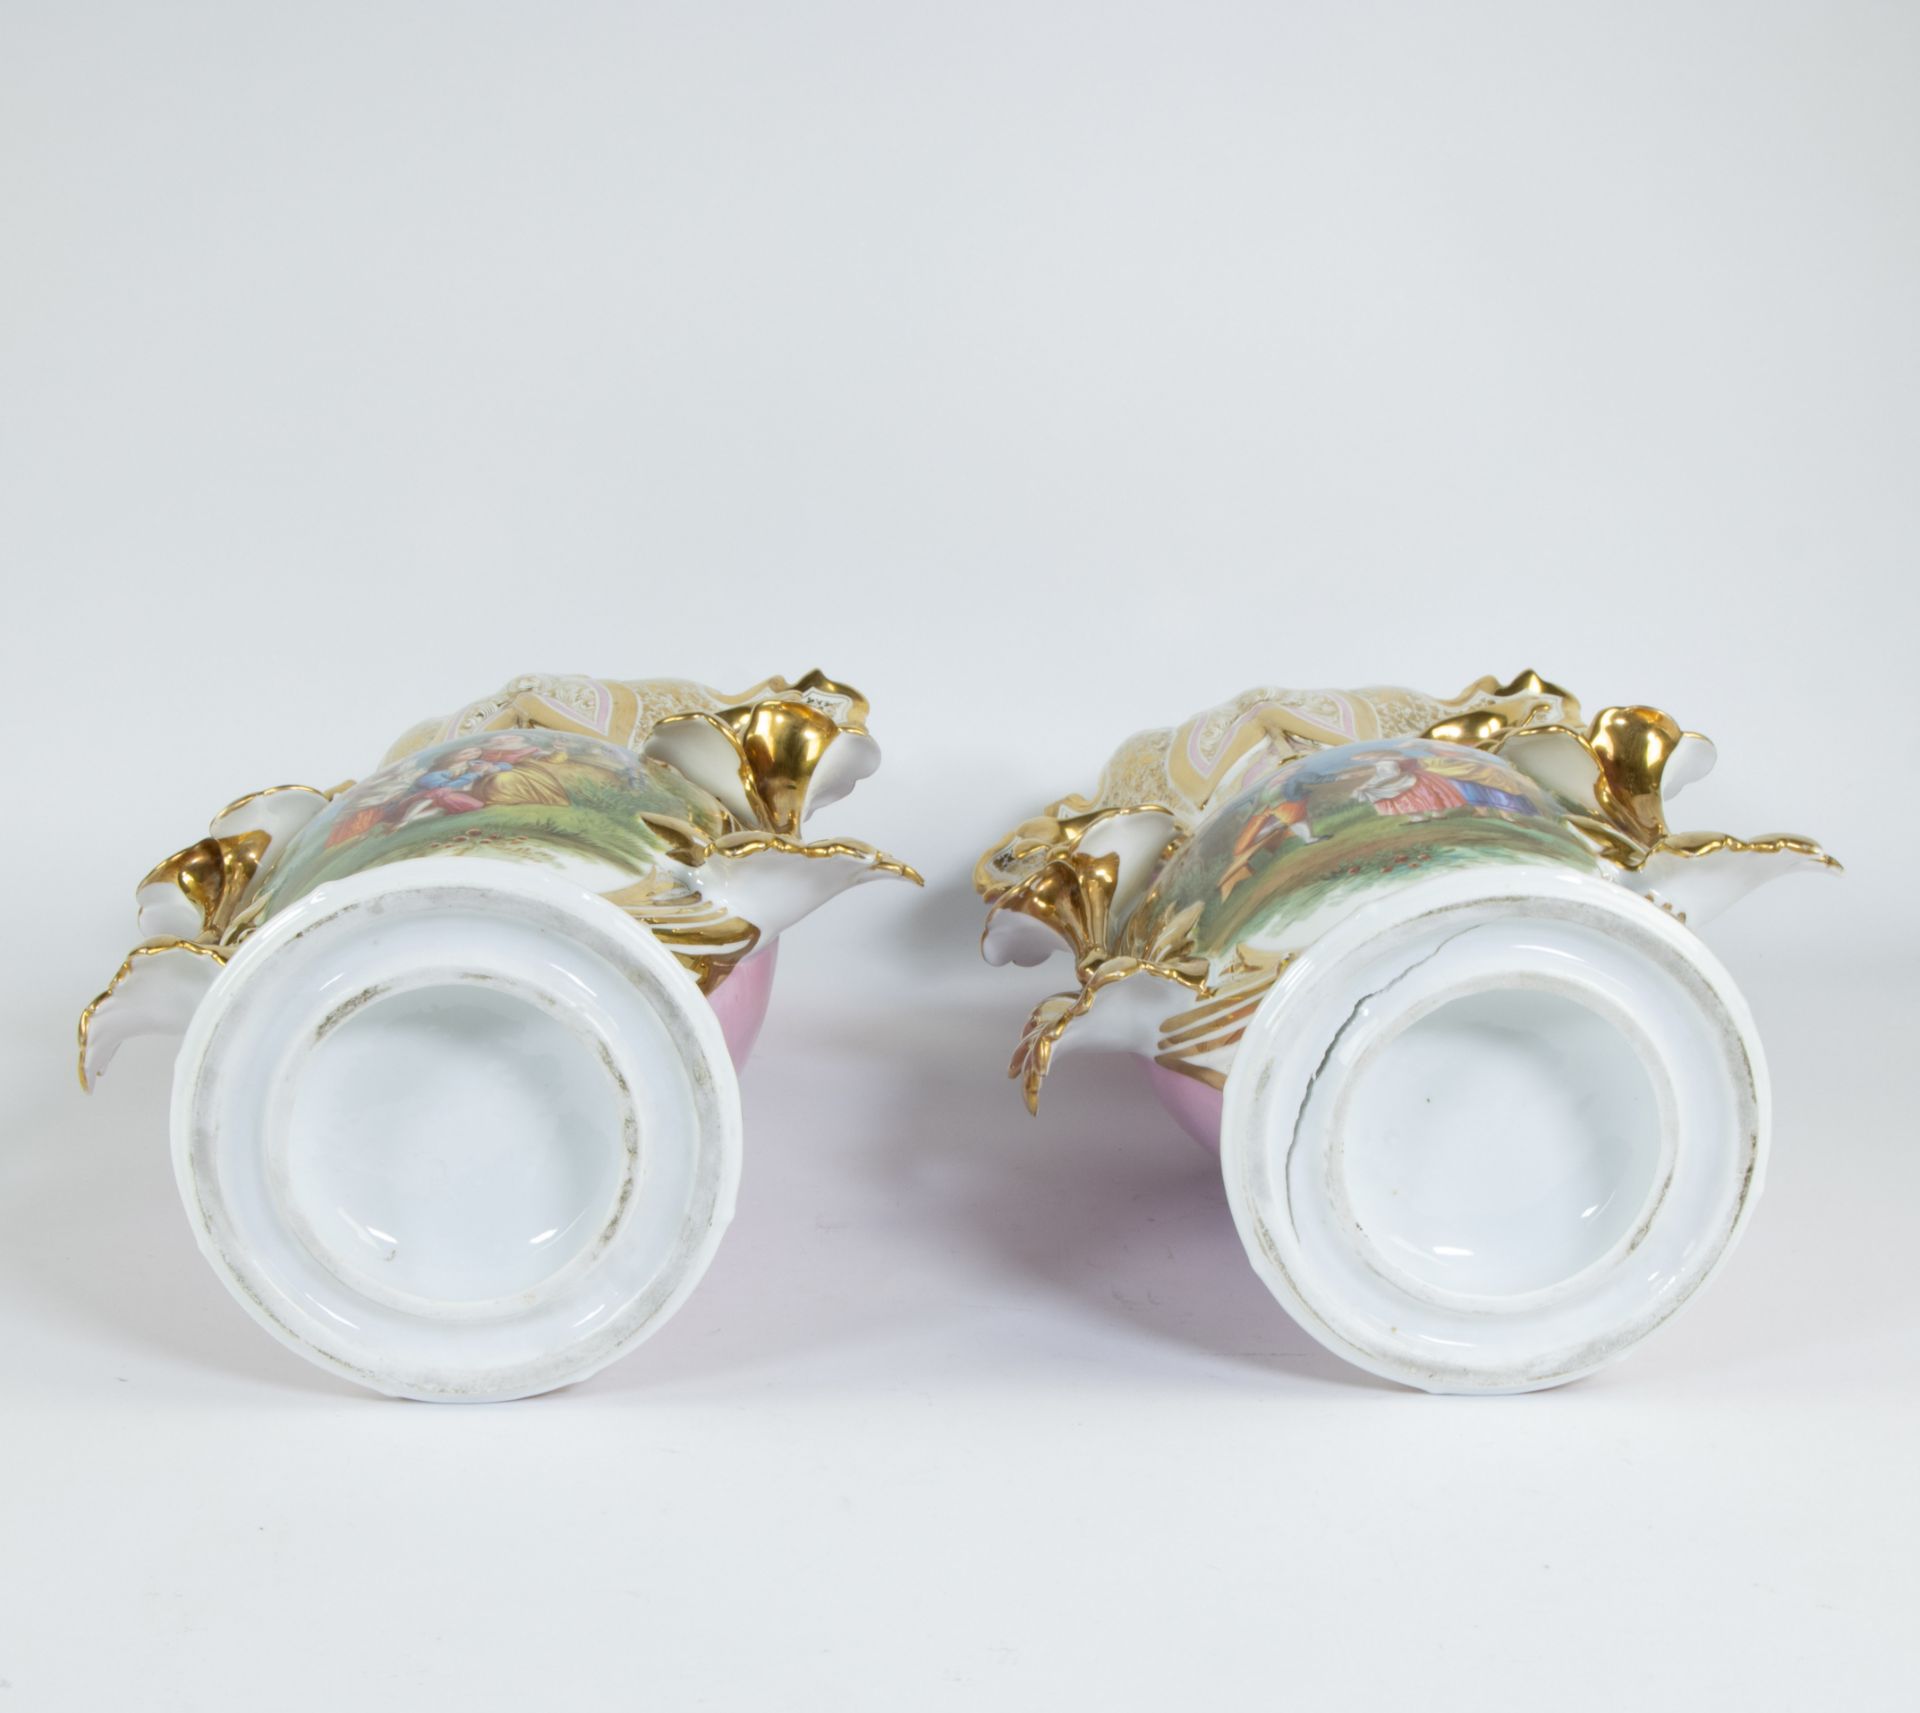 Exceptionally large pair of porcelain vases with gilded leaf motifs and romantic decor, Porcelaine d - Image 5 of 7